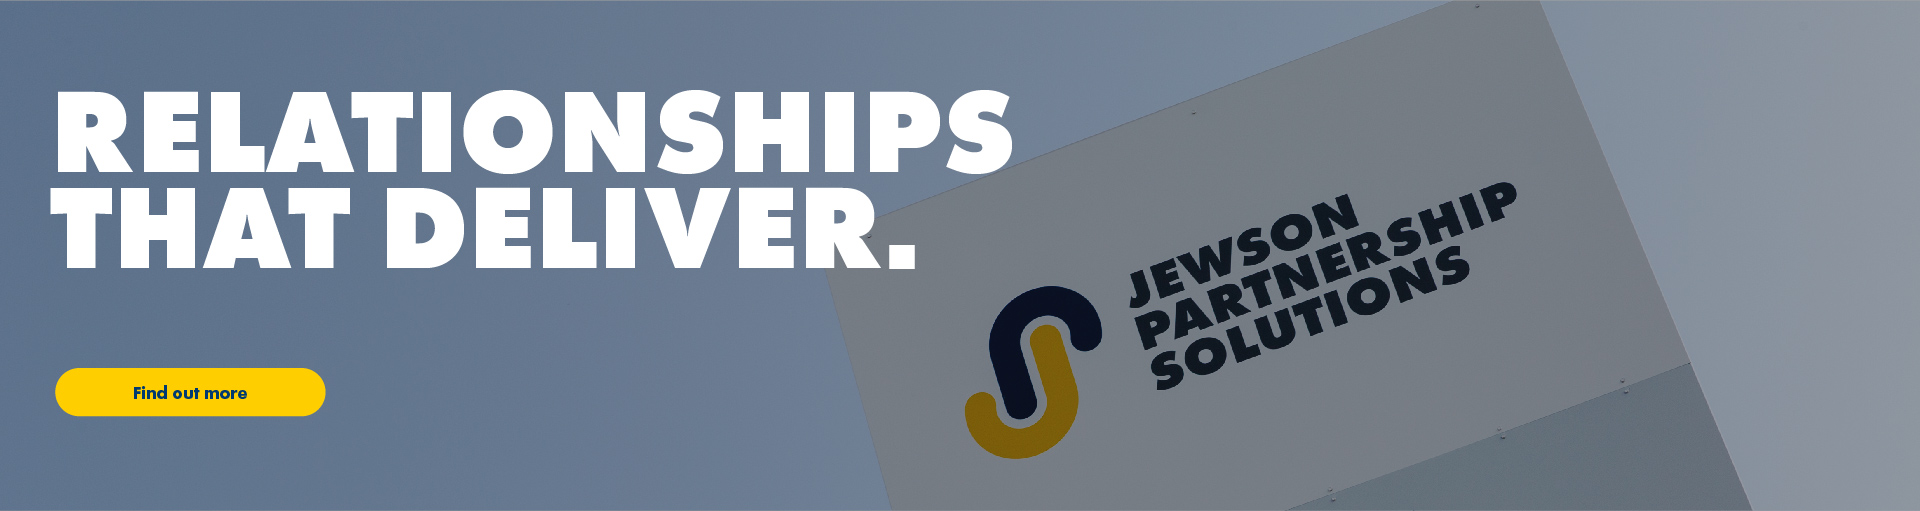 JPS is dedicated to relationships that deliver